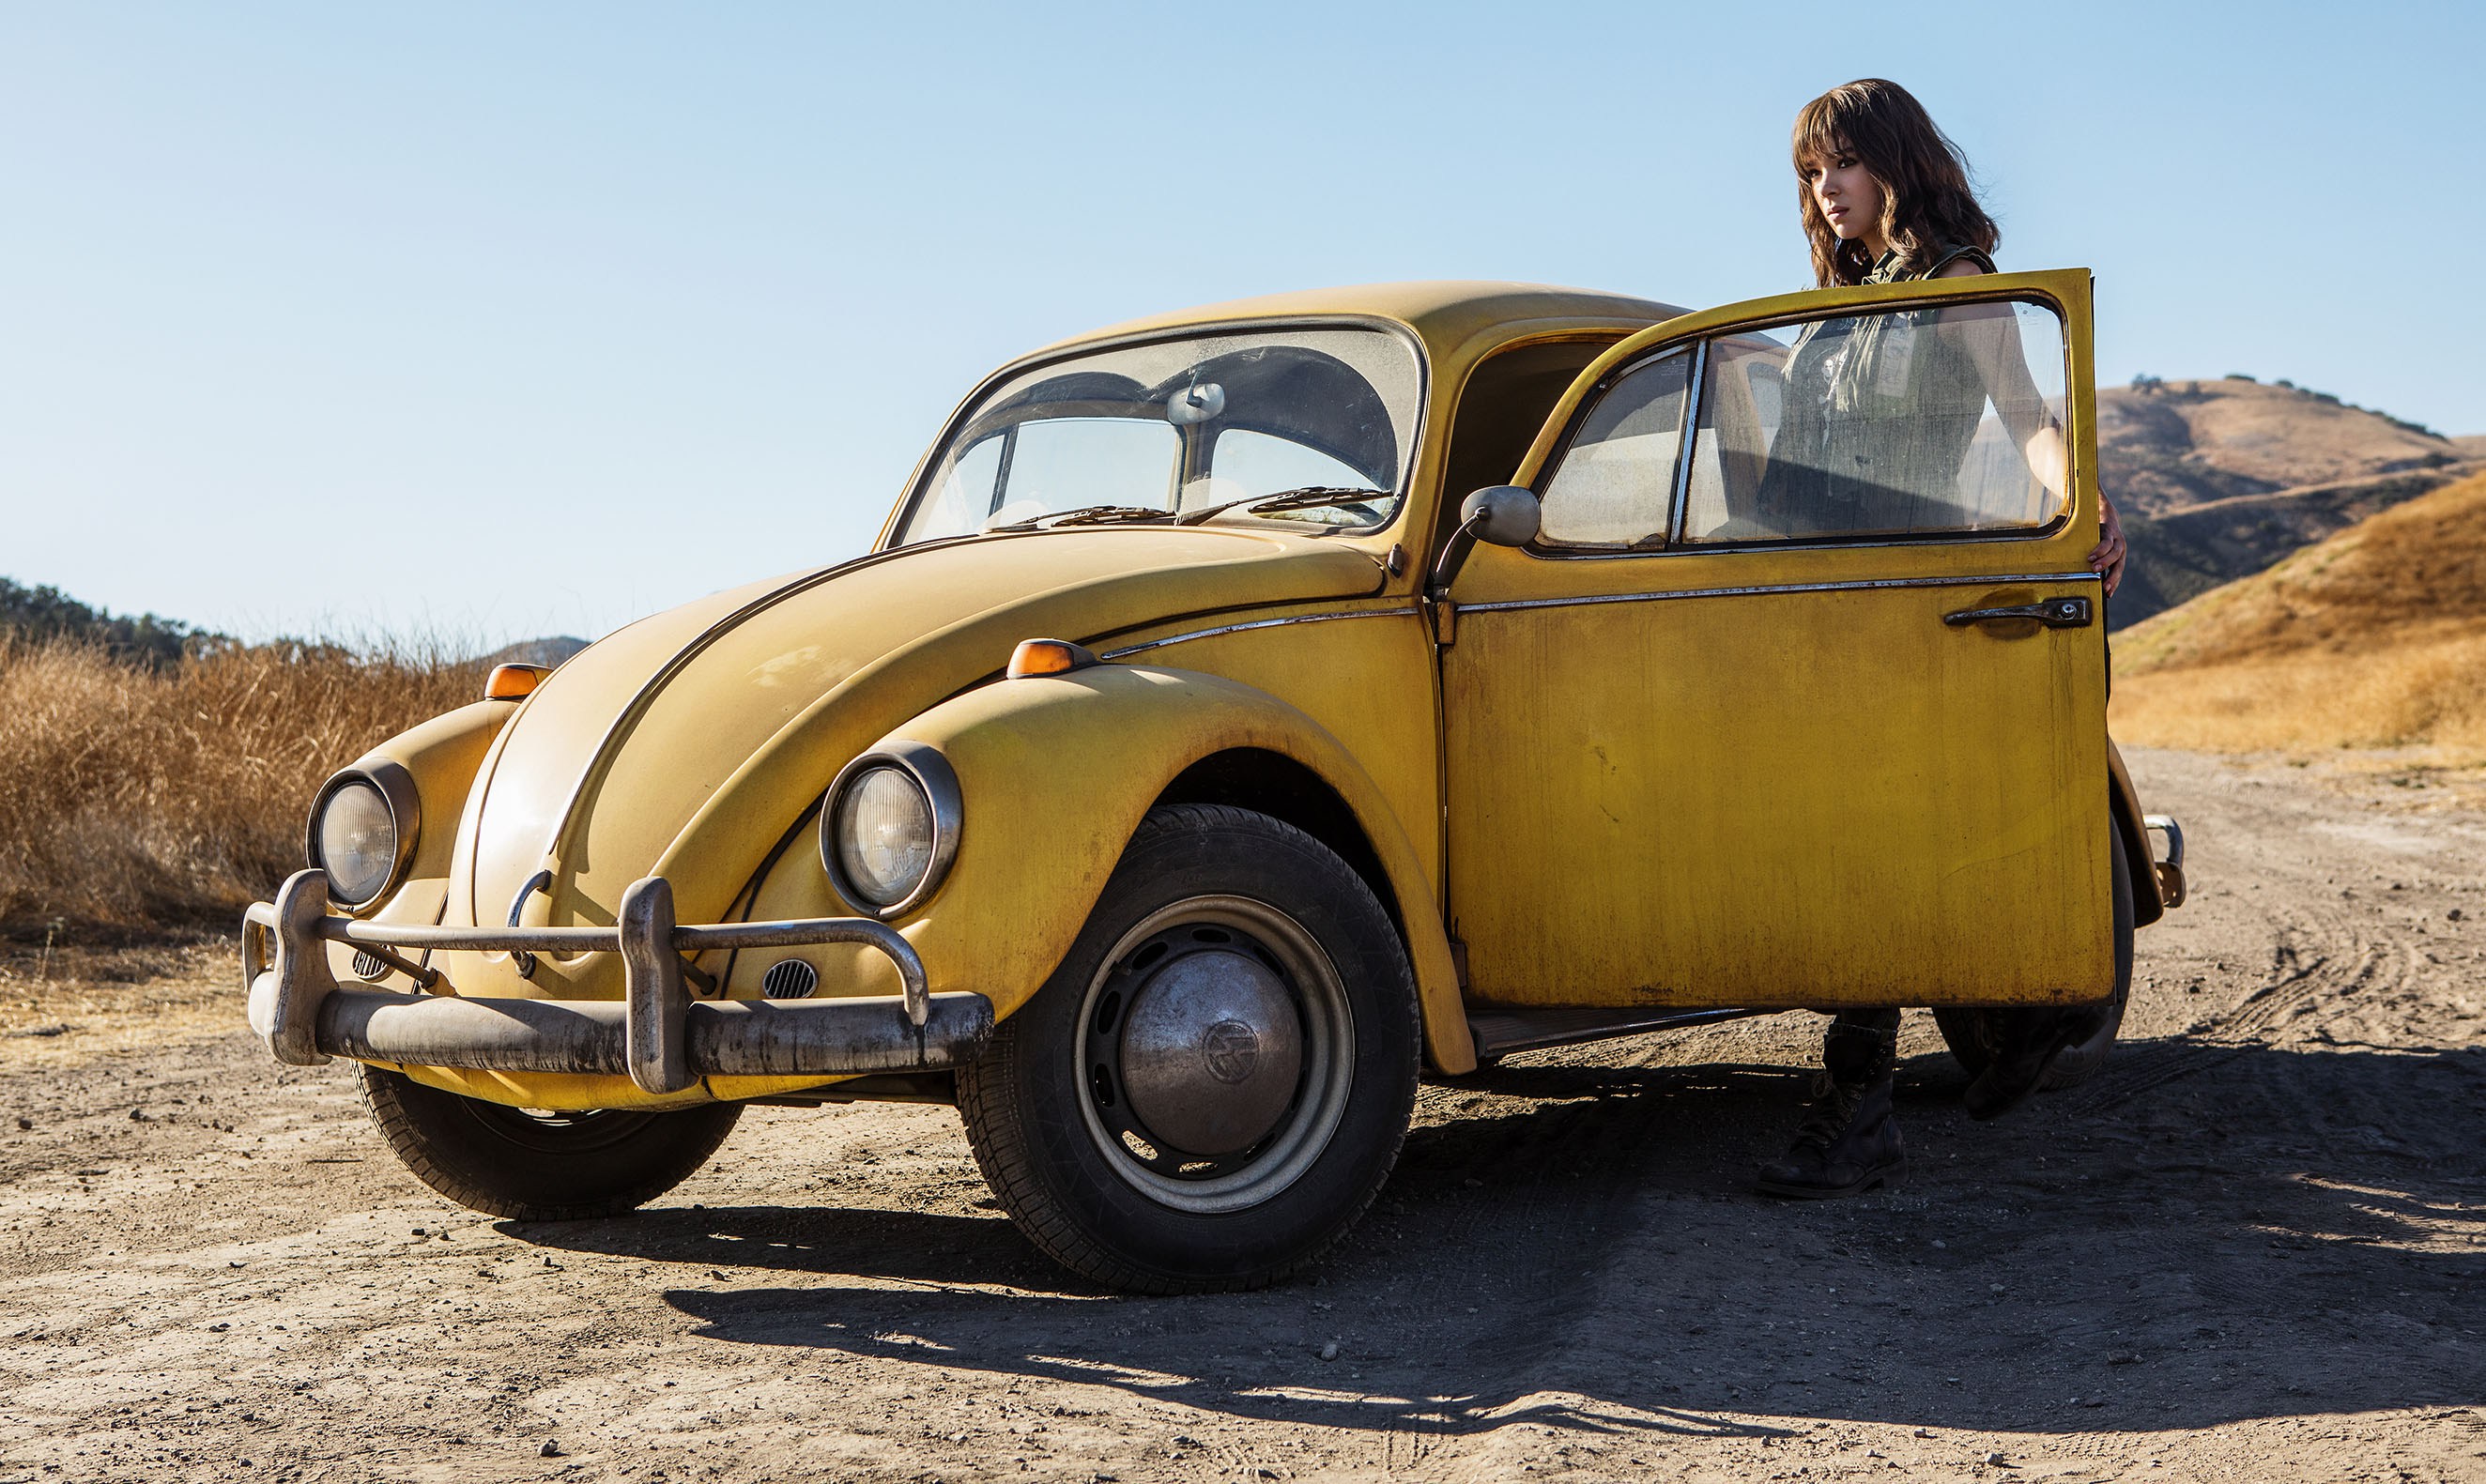  Hailee Steinfeld in BUMBLEBEE, from Paramount Pictures. Photo Credit: Jaimie Trueblood © 2018 Paramount Pictures. All Rights Reserved. HASBRO, TRANSFORMERS, and all related characters are trademarks of Hasbro. © 2018 Hasbro. All Rights Reserved.